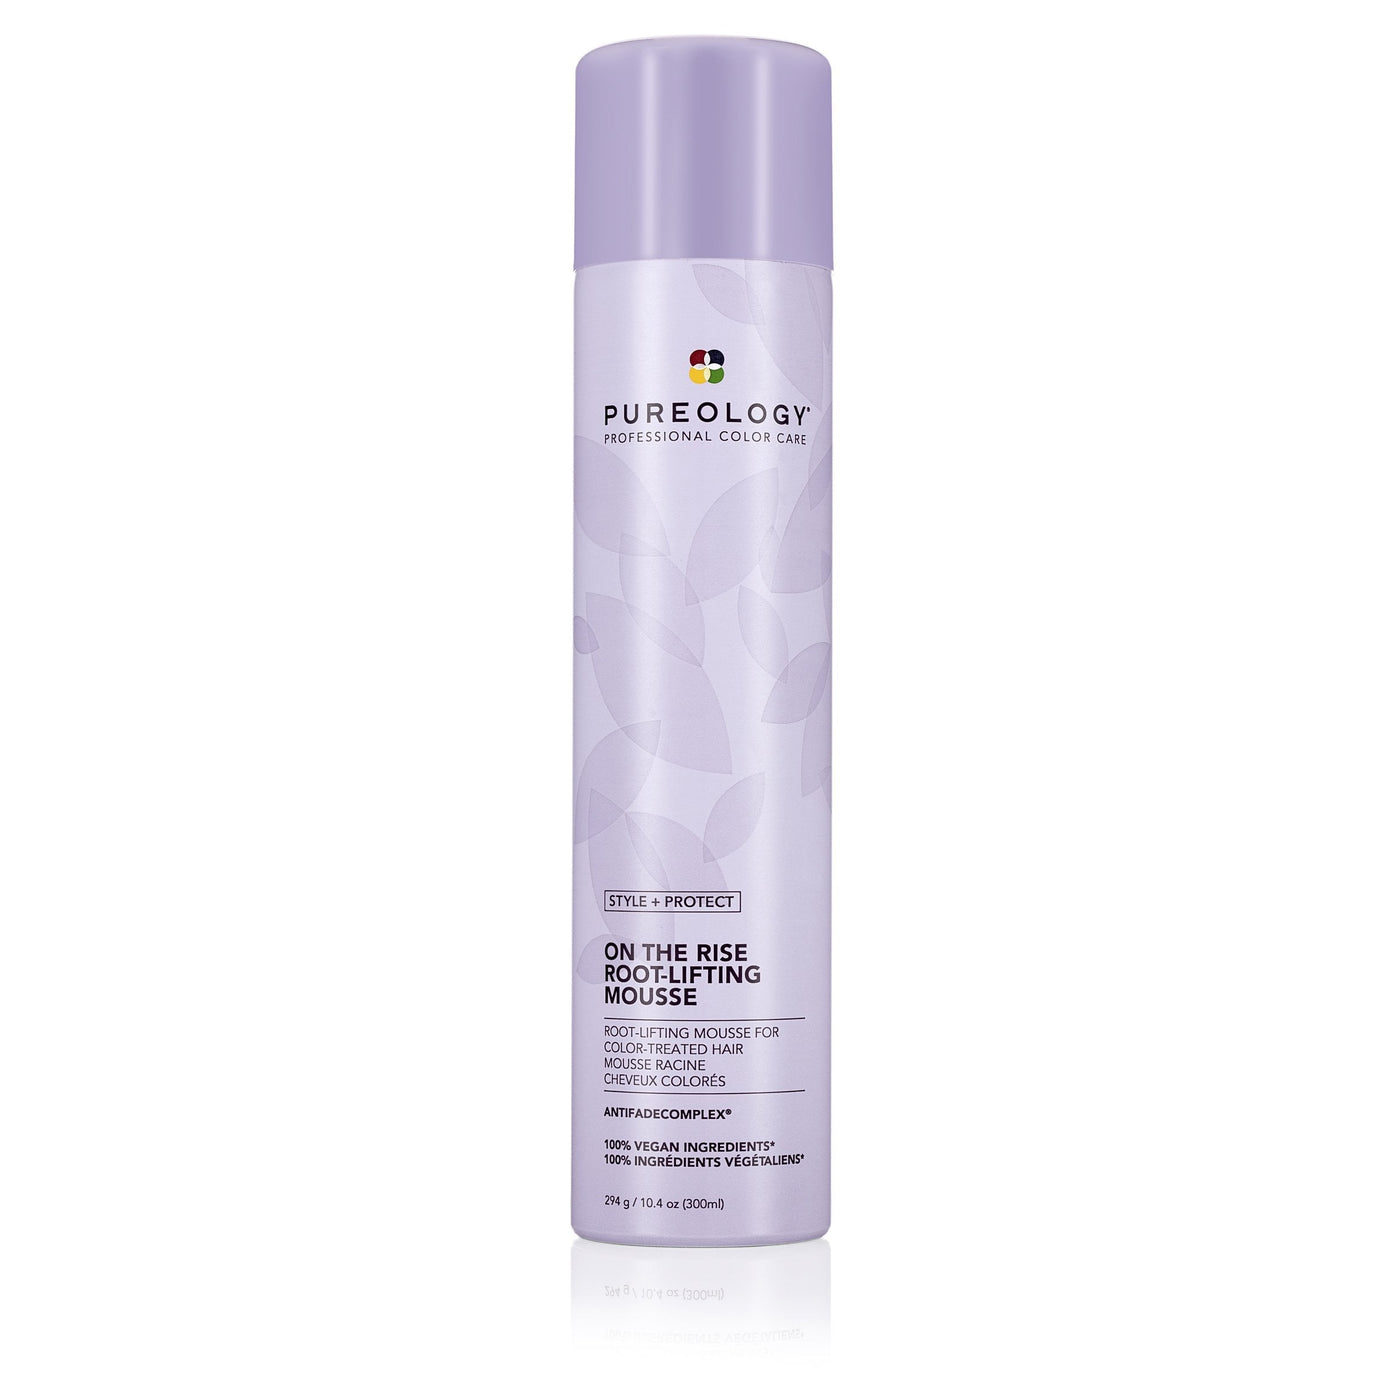 Pureology Style + Protect On the Rise Root Lifting Mousse 300ml